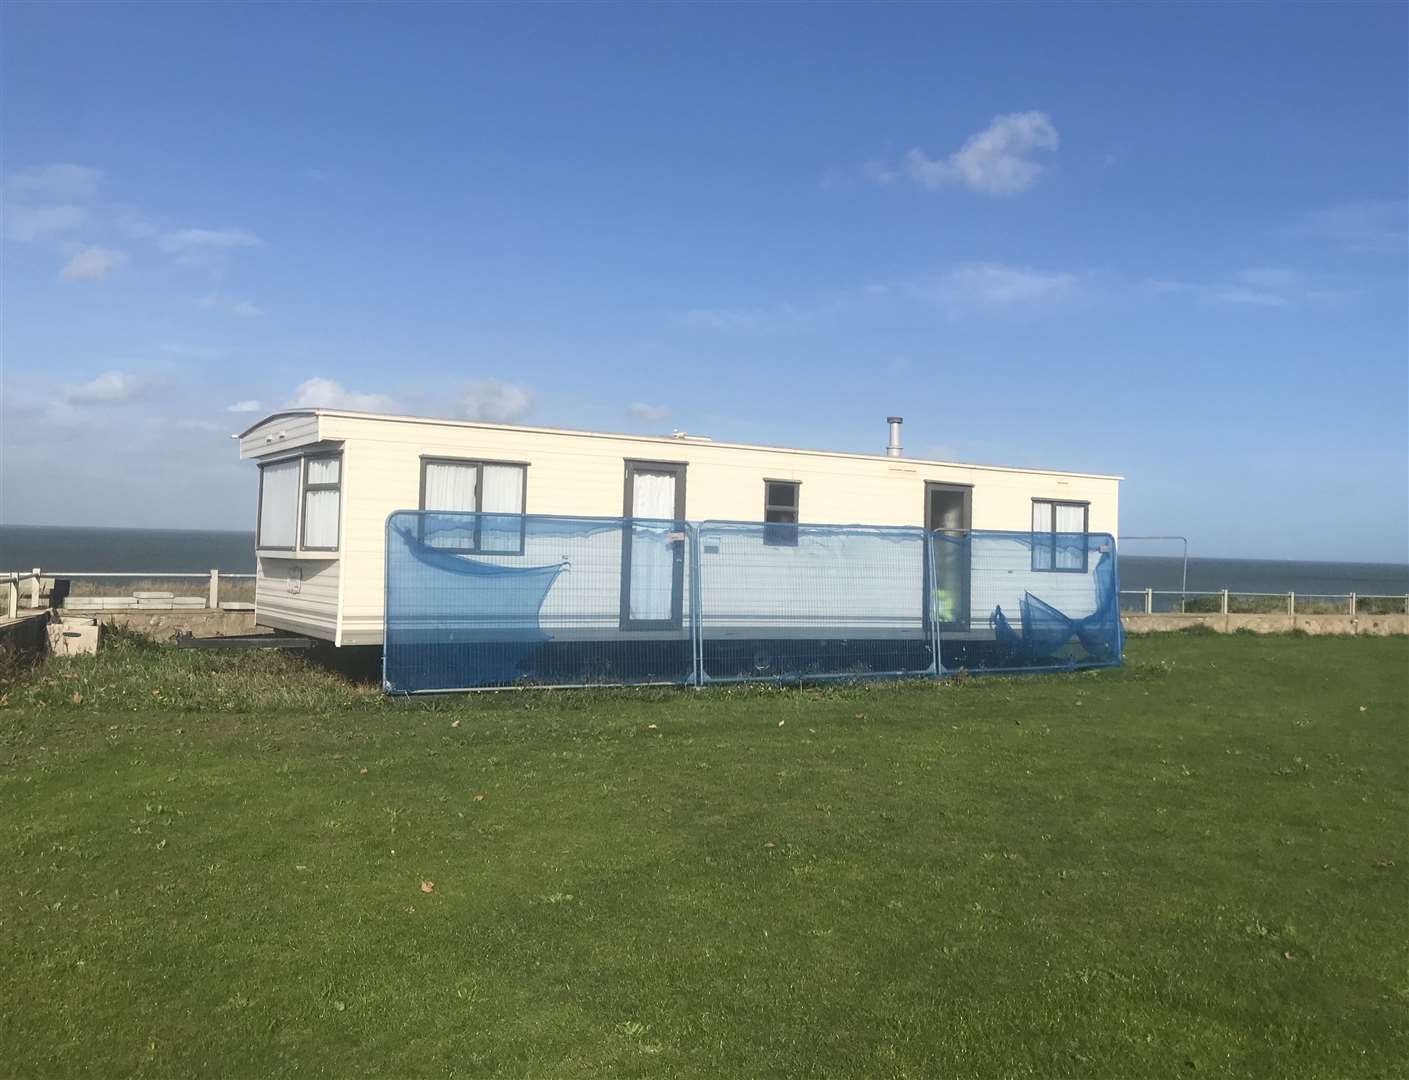 A static home has appeared on a clifftop in Westgate